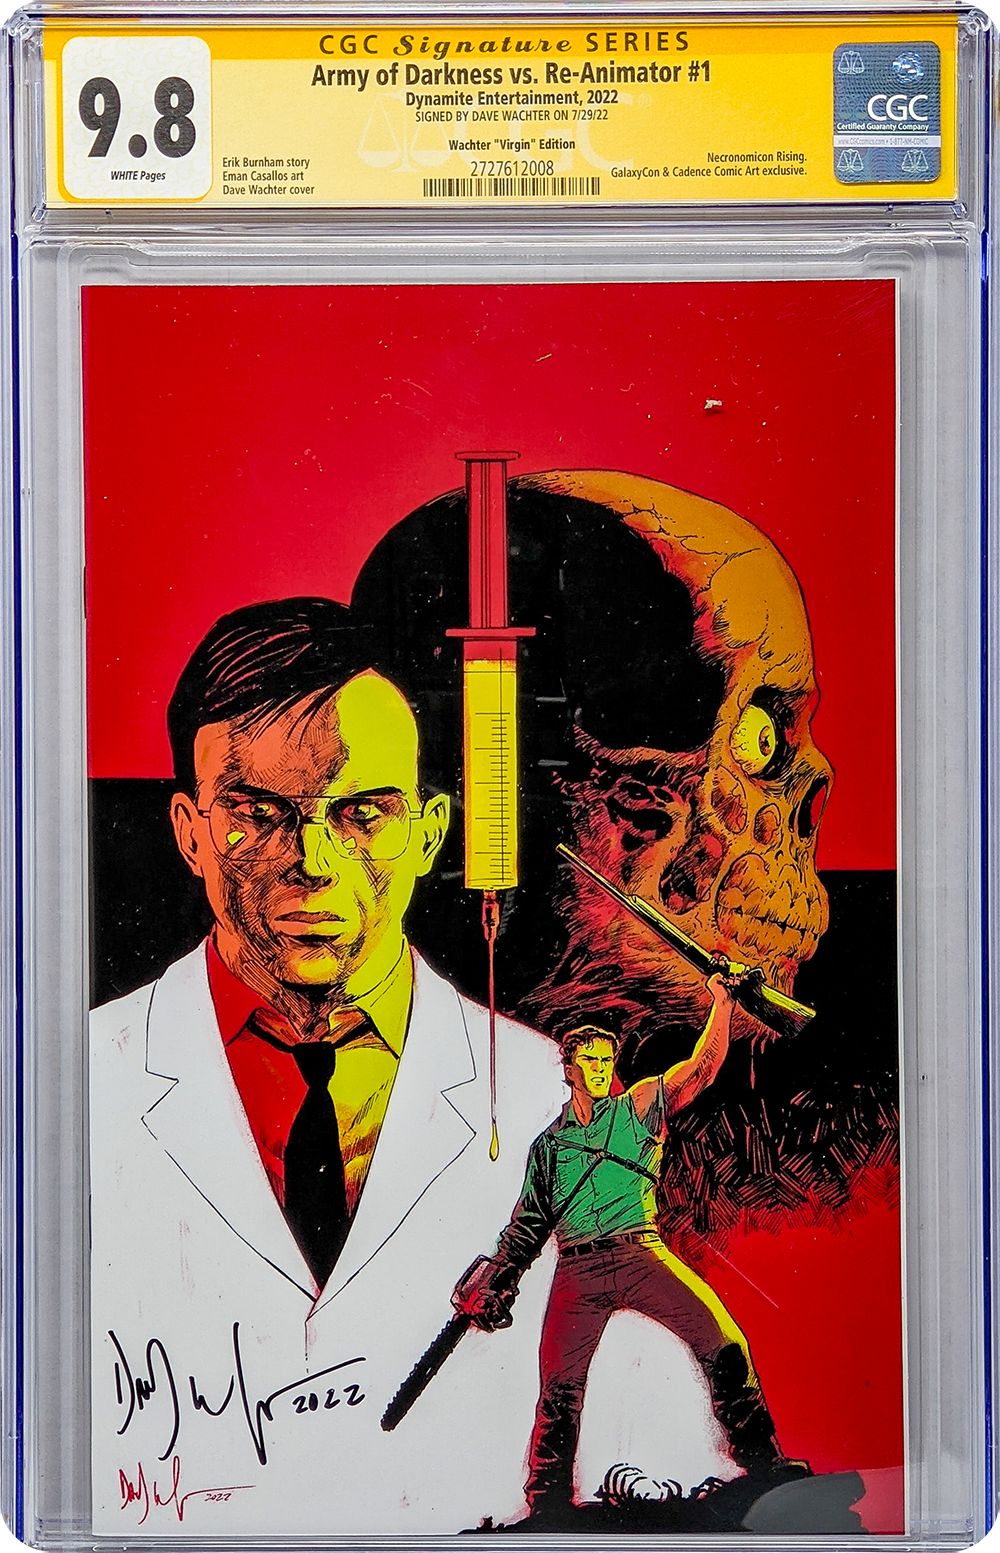 Army of Darkness vs. Reanimator: Necronomicon Rising #1 GalaxyCon Exclusive Virgin Variant CGC Signature Series 9.8 Dave Wachter GalaxyCon